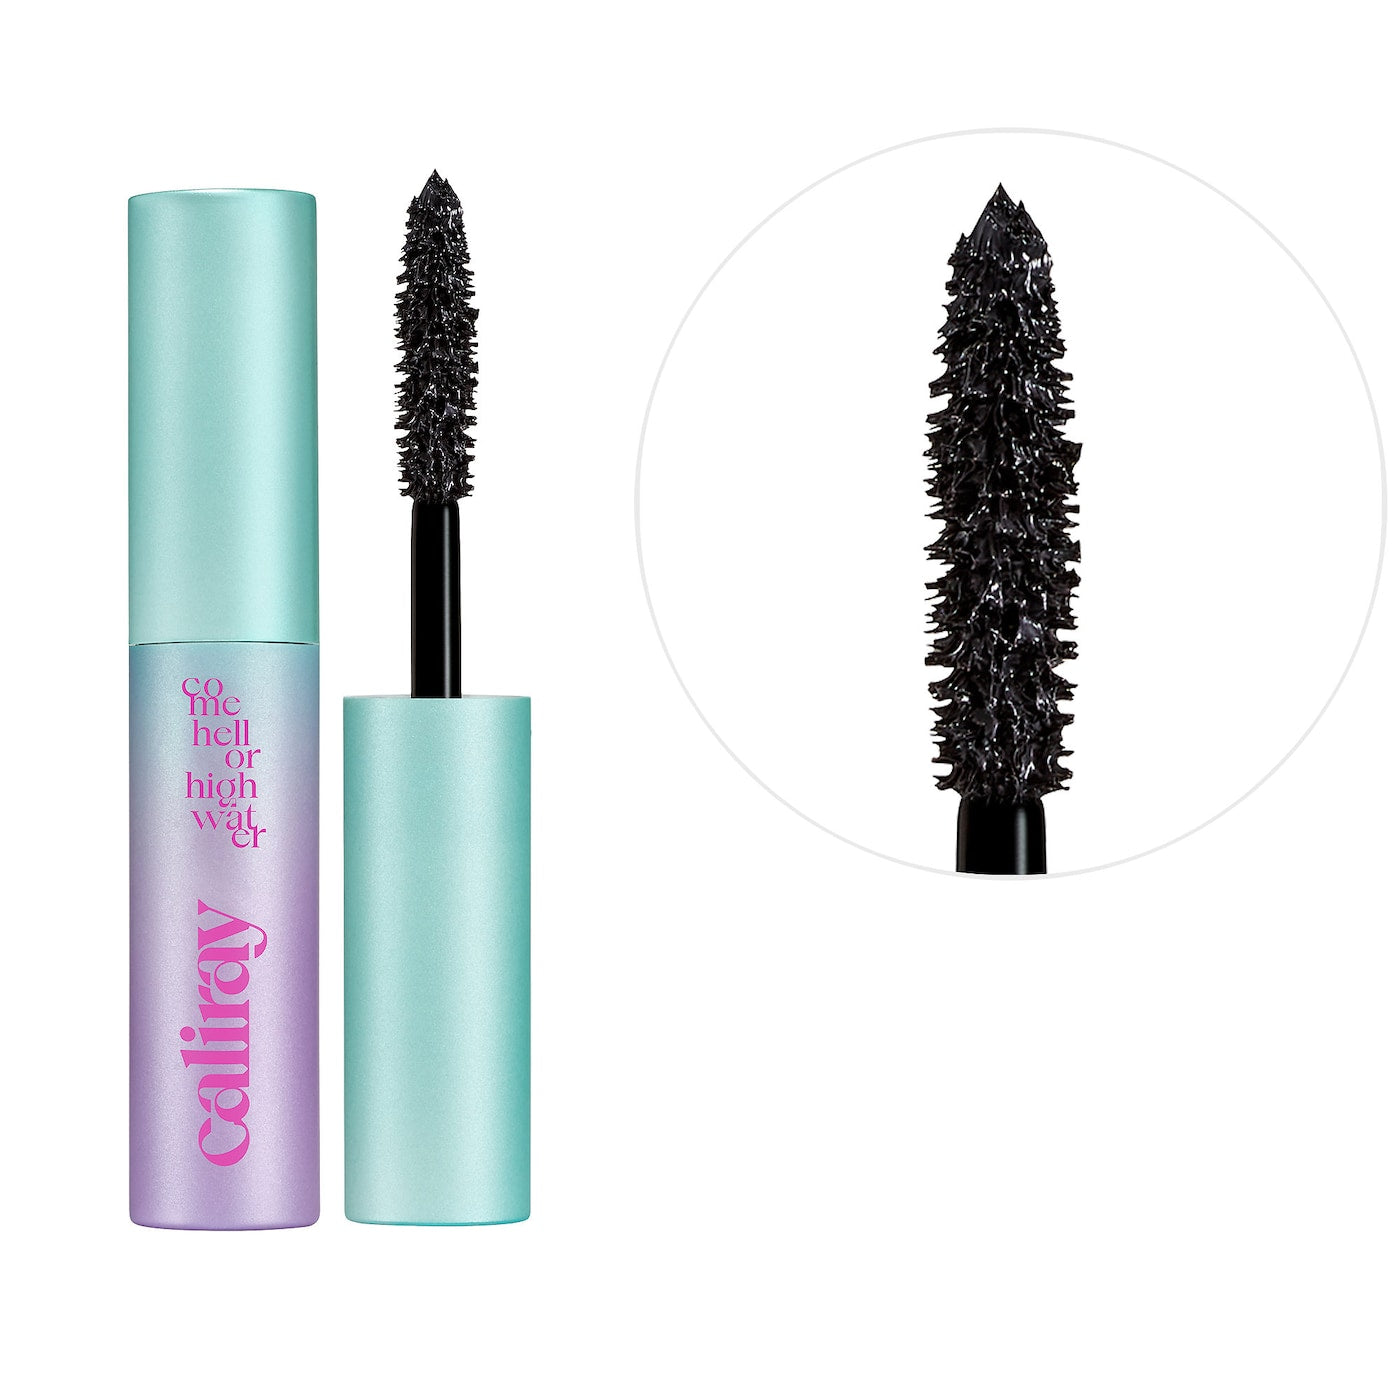 Caliray | Come Hell or High Water Mascara trial size